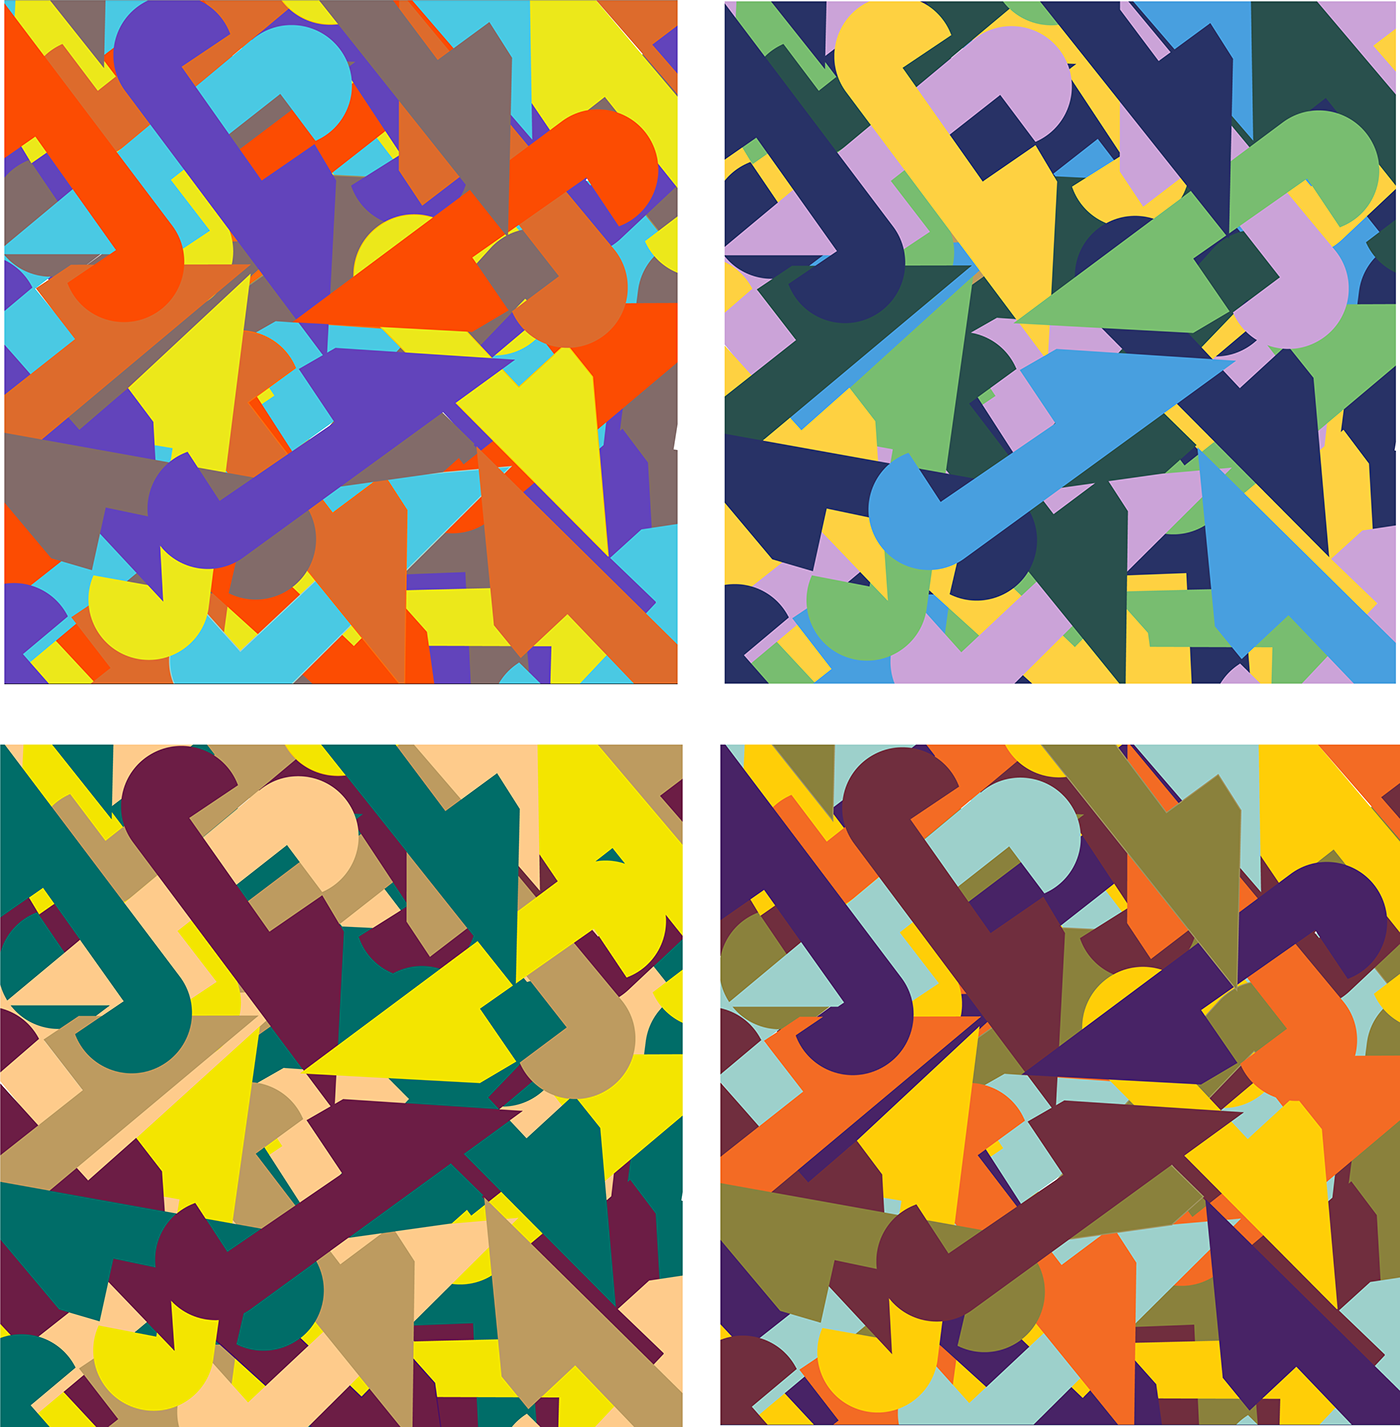 pattern design graphic design risd patterns using color abstract pattern design  pantone colors graphic design  geometric pattern energetic pattern